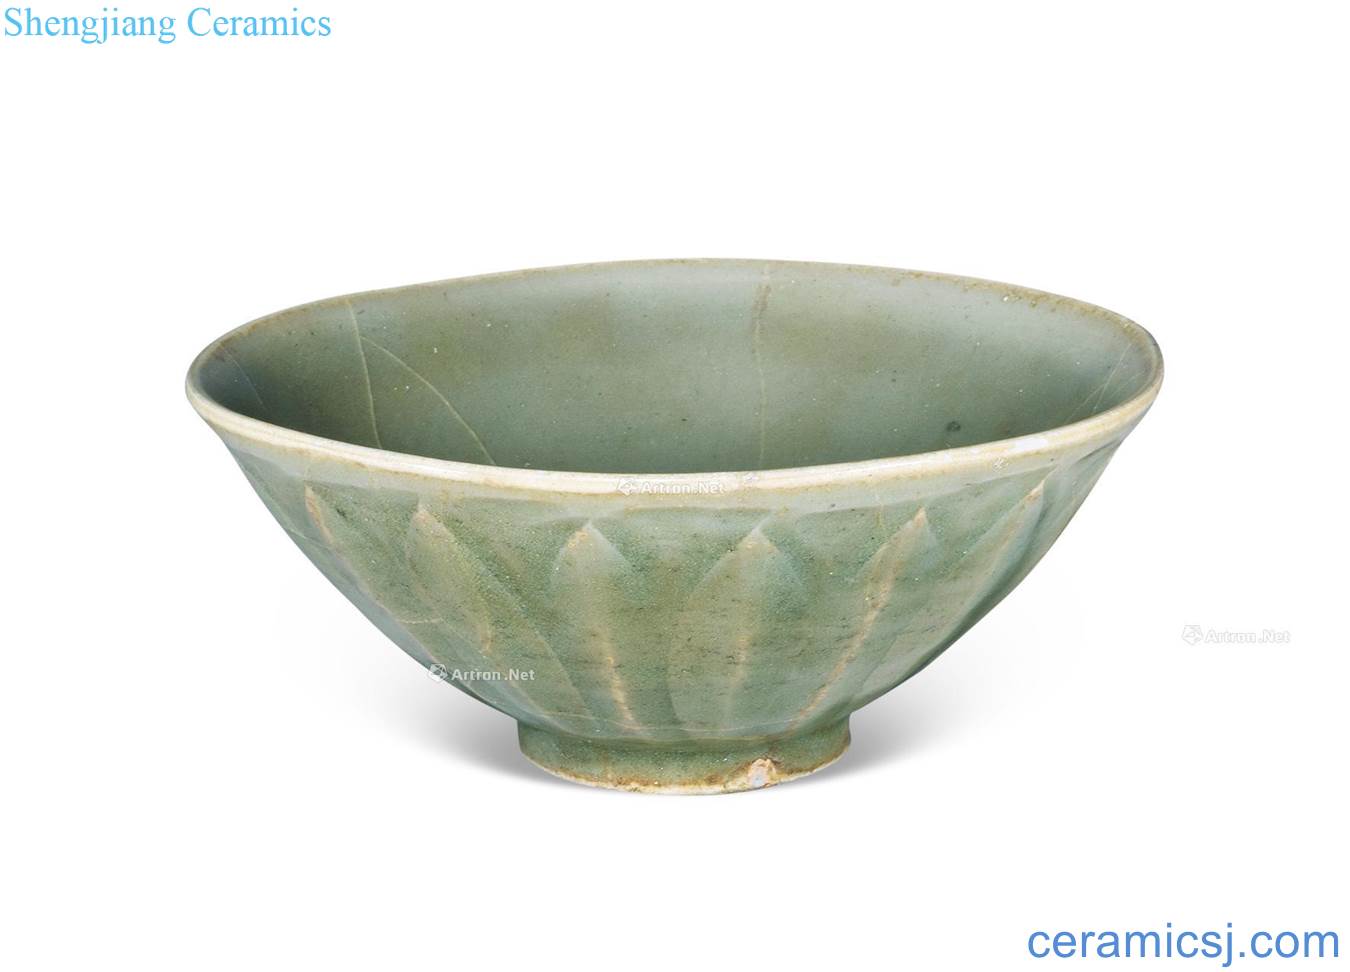 The southern song dynasty Yao state kiln bowl of carve patterns or designs on woodwork